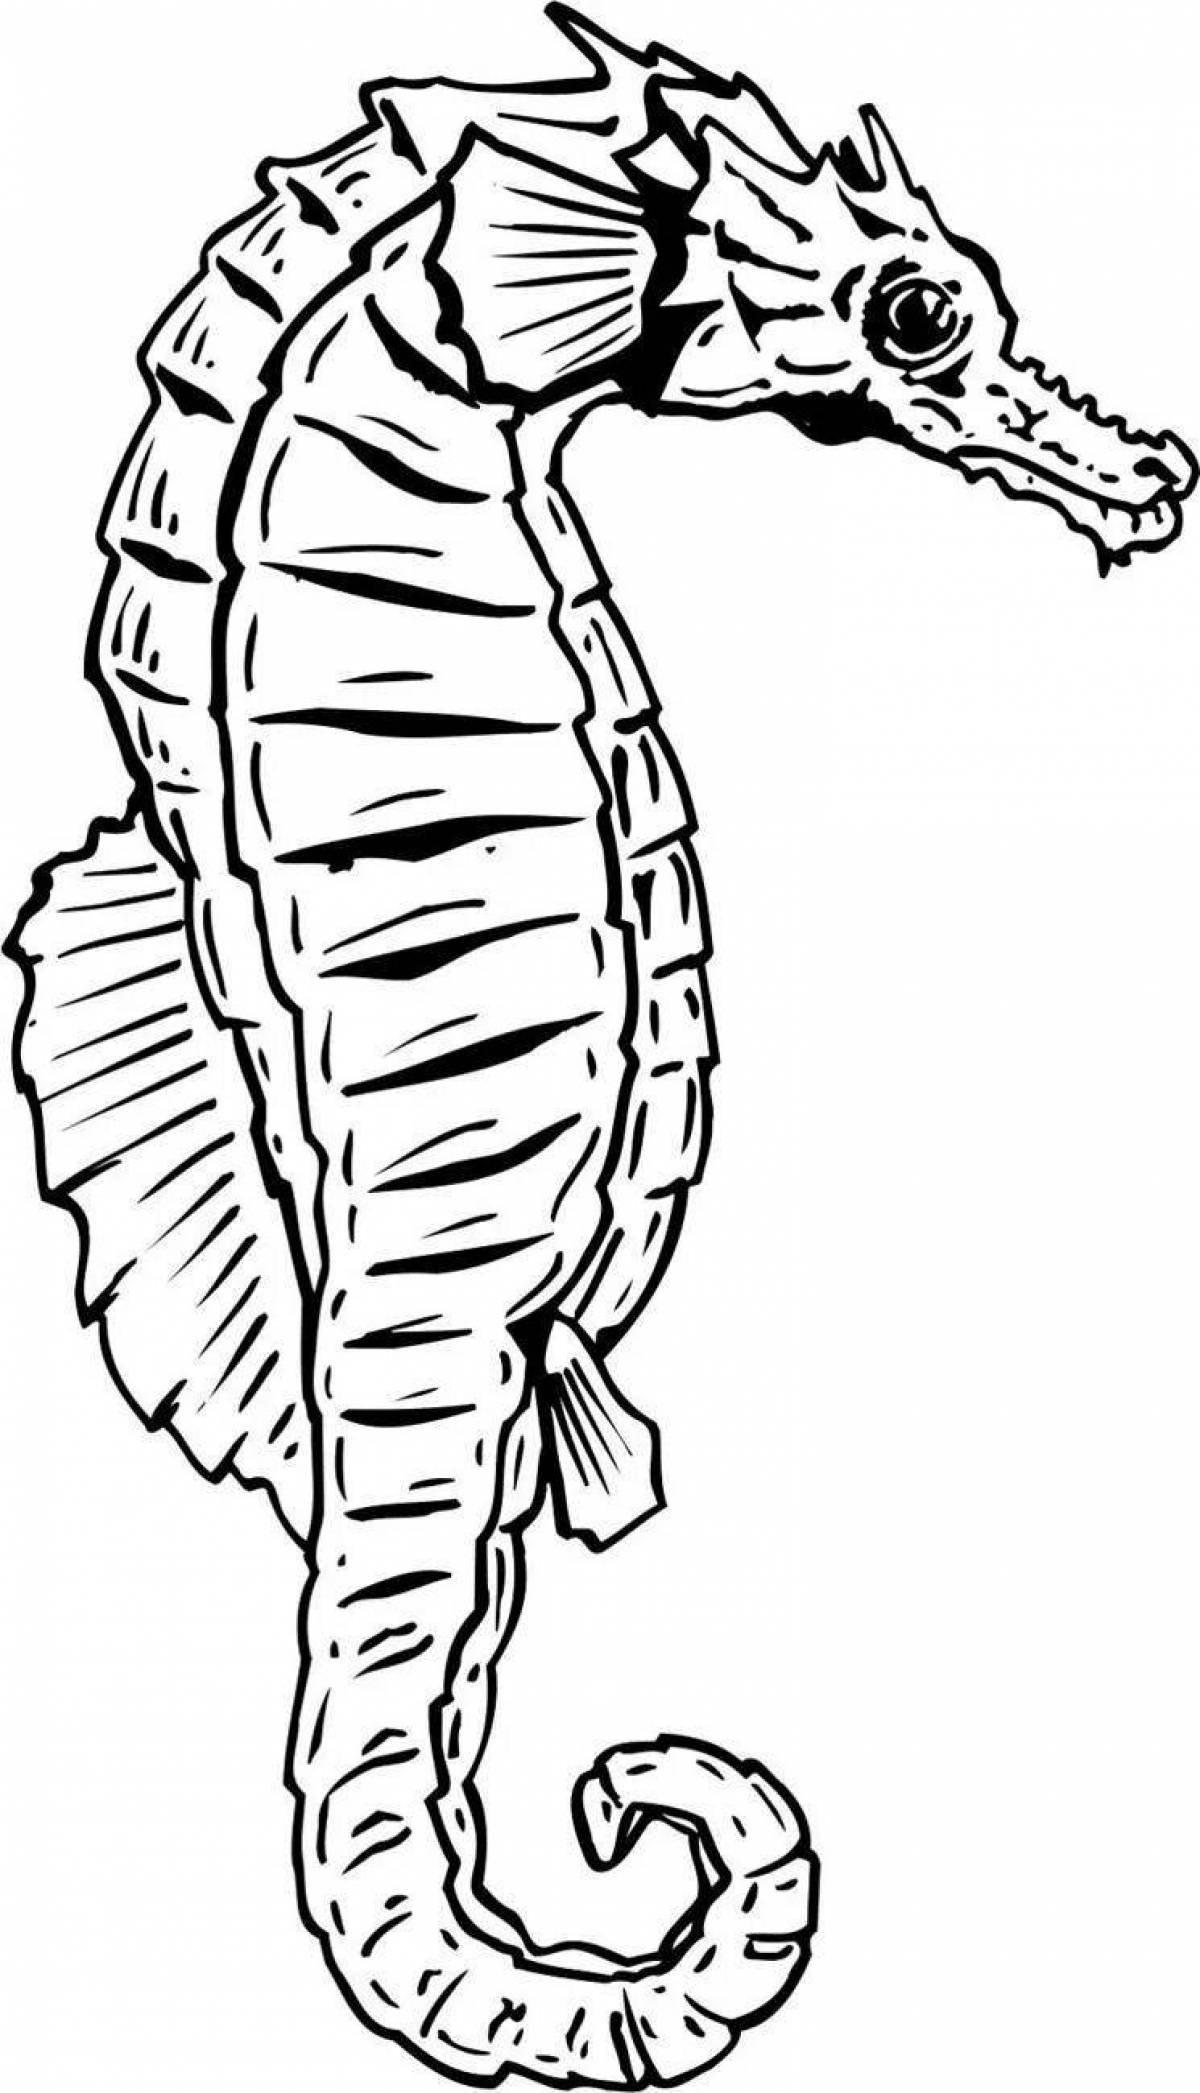 Adorable seahorse coloring book for kids